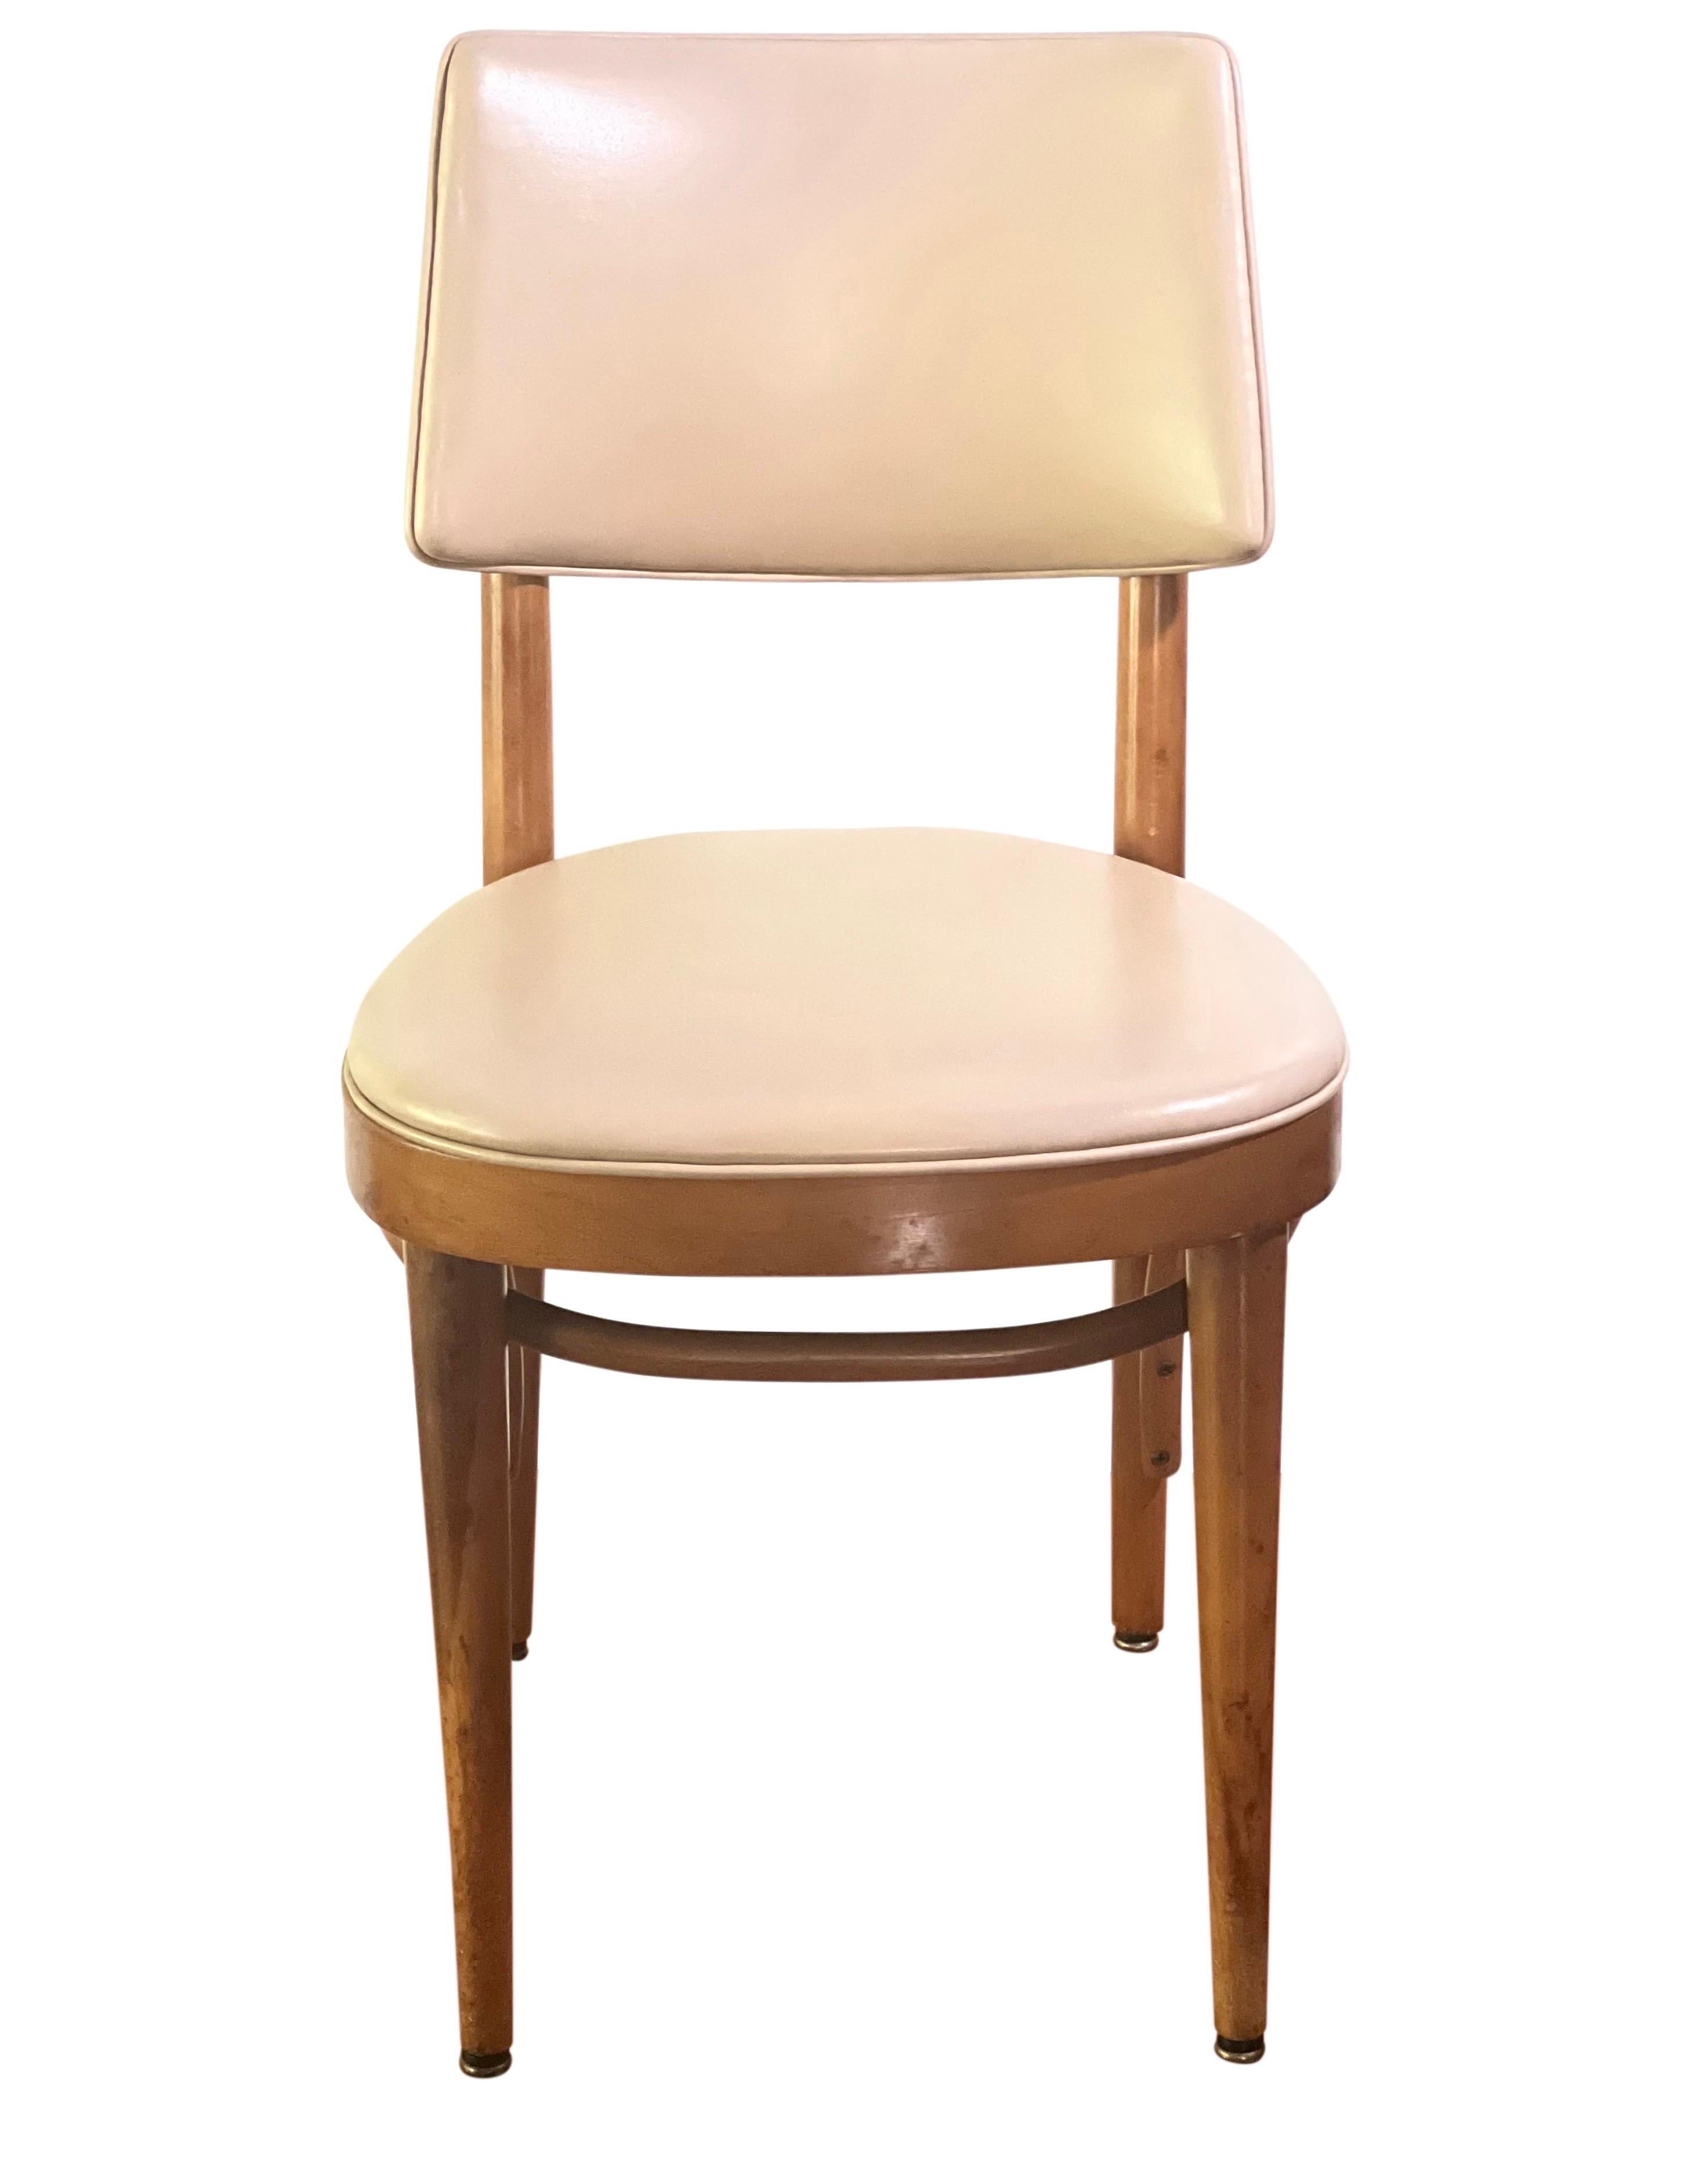 Midcentury Thonet bentwood upholstered chair.

Single chair with Classic midcentury design with bentwood base. Neutral cream Naugahyde upholstery in very good condition. It features a generous, comfortable backrest. Great chair perfect for so many